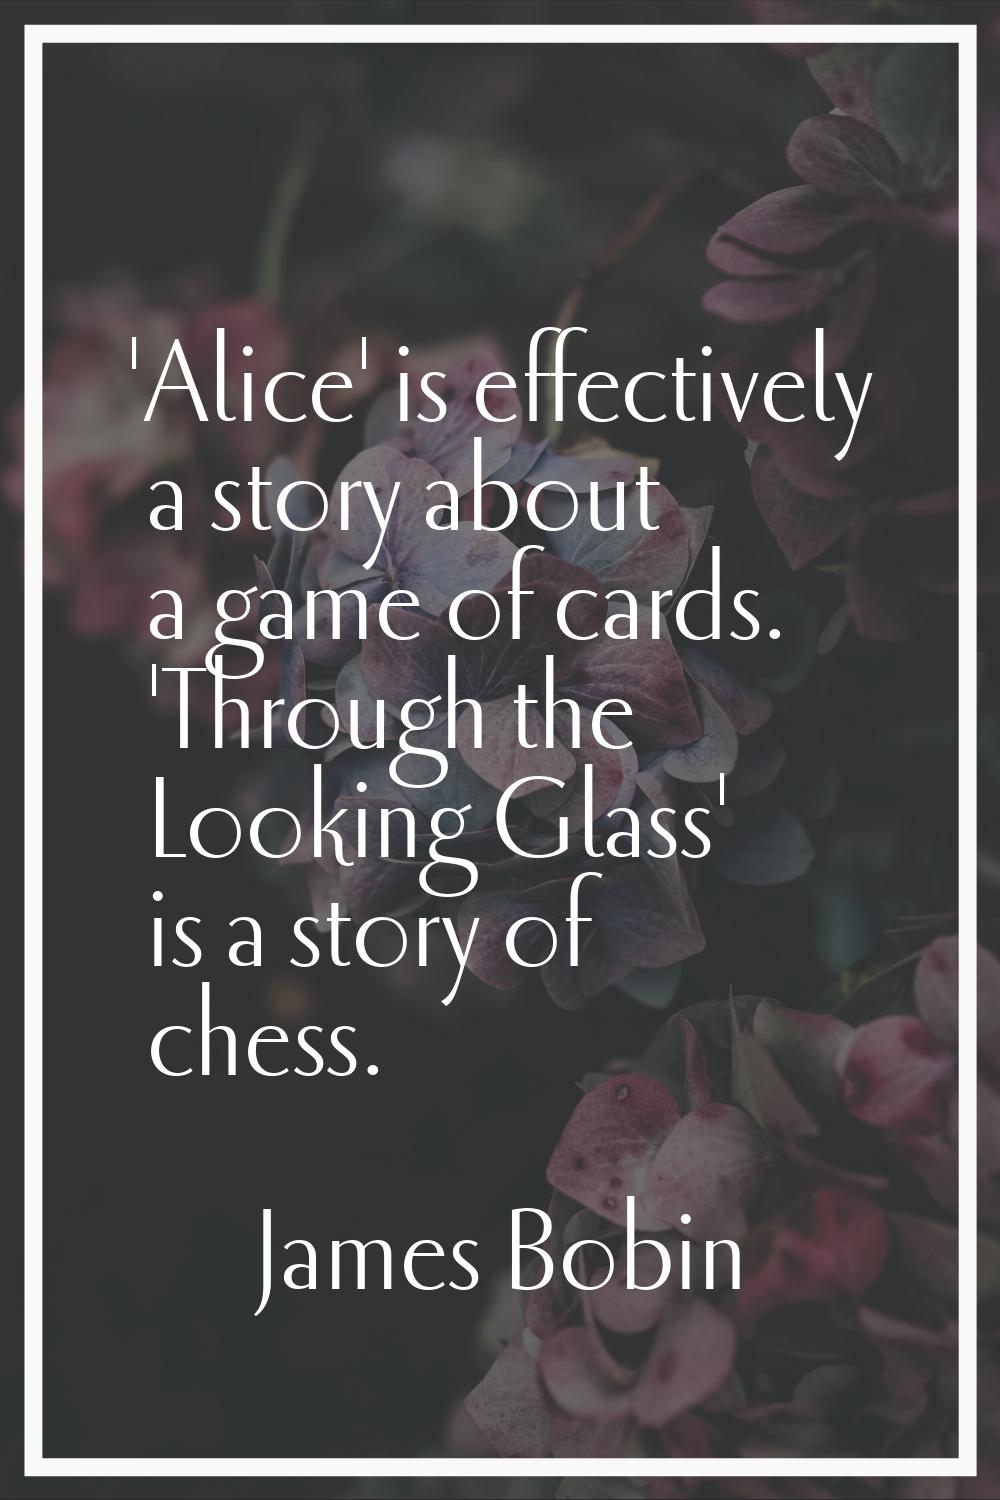 'Alice' is effectively a story about a game of cards. 'Through the Looking Glass' is a story of che